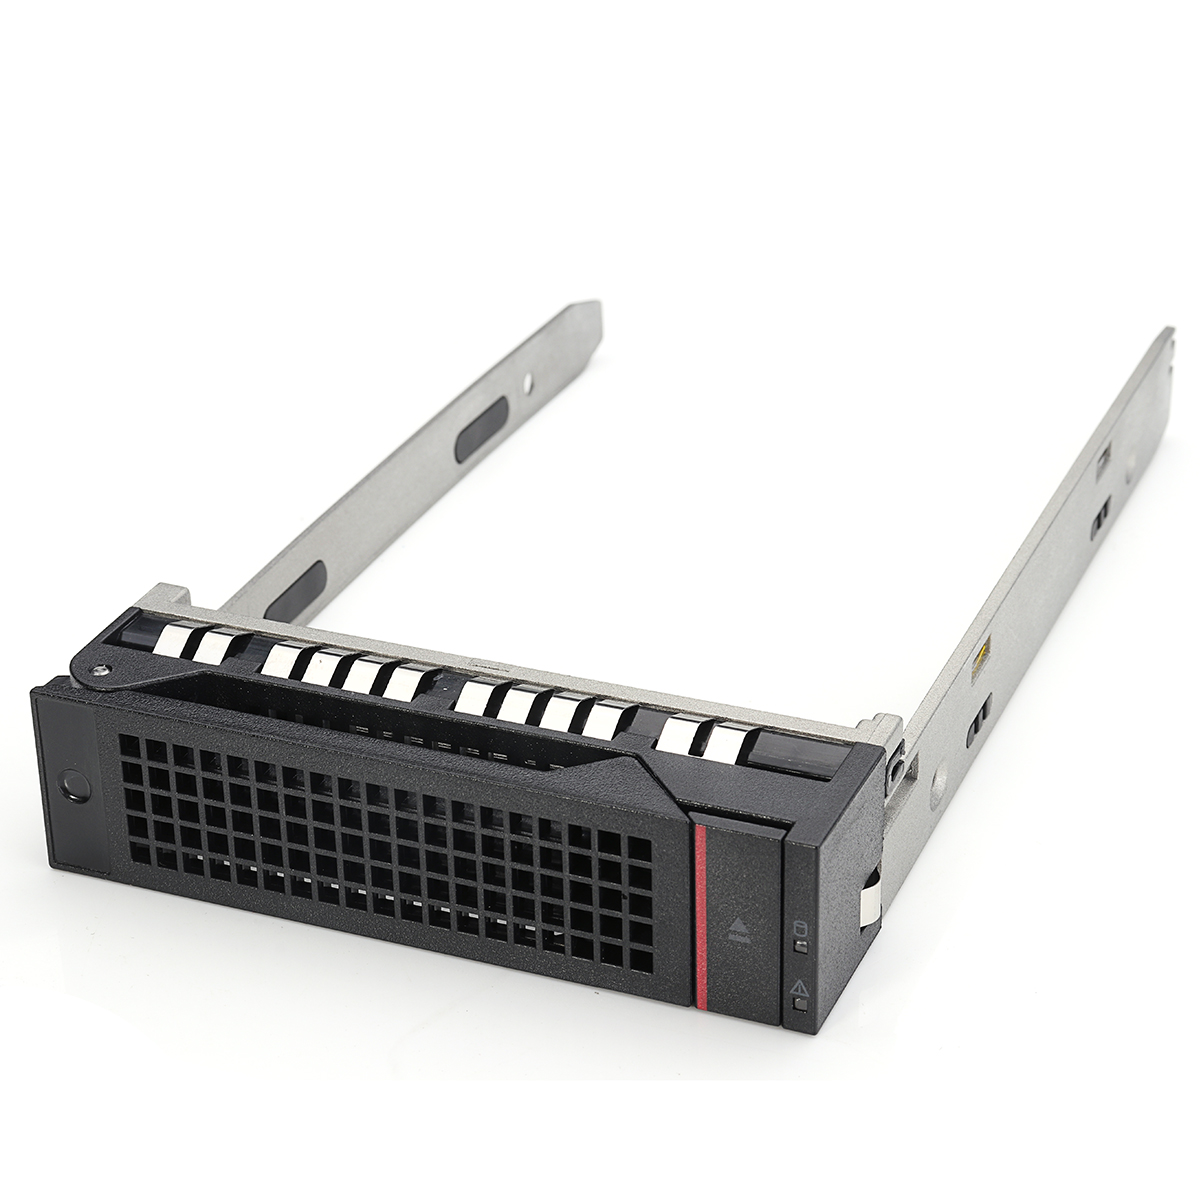 Find 3 5 Hard Drive Caddy Tray Converter For Lenovo RD330 Laptop for Sale on Gipsybee.com with cryptocurrencies